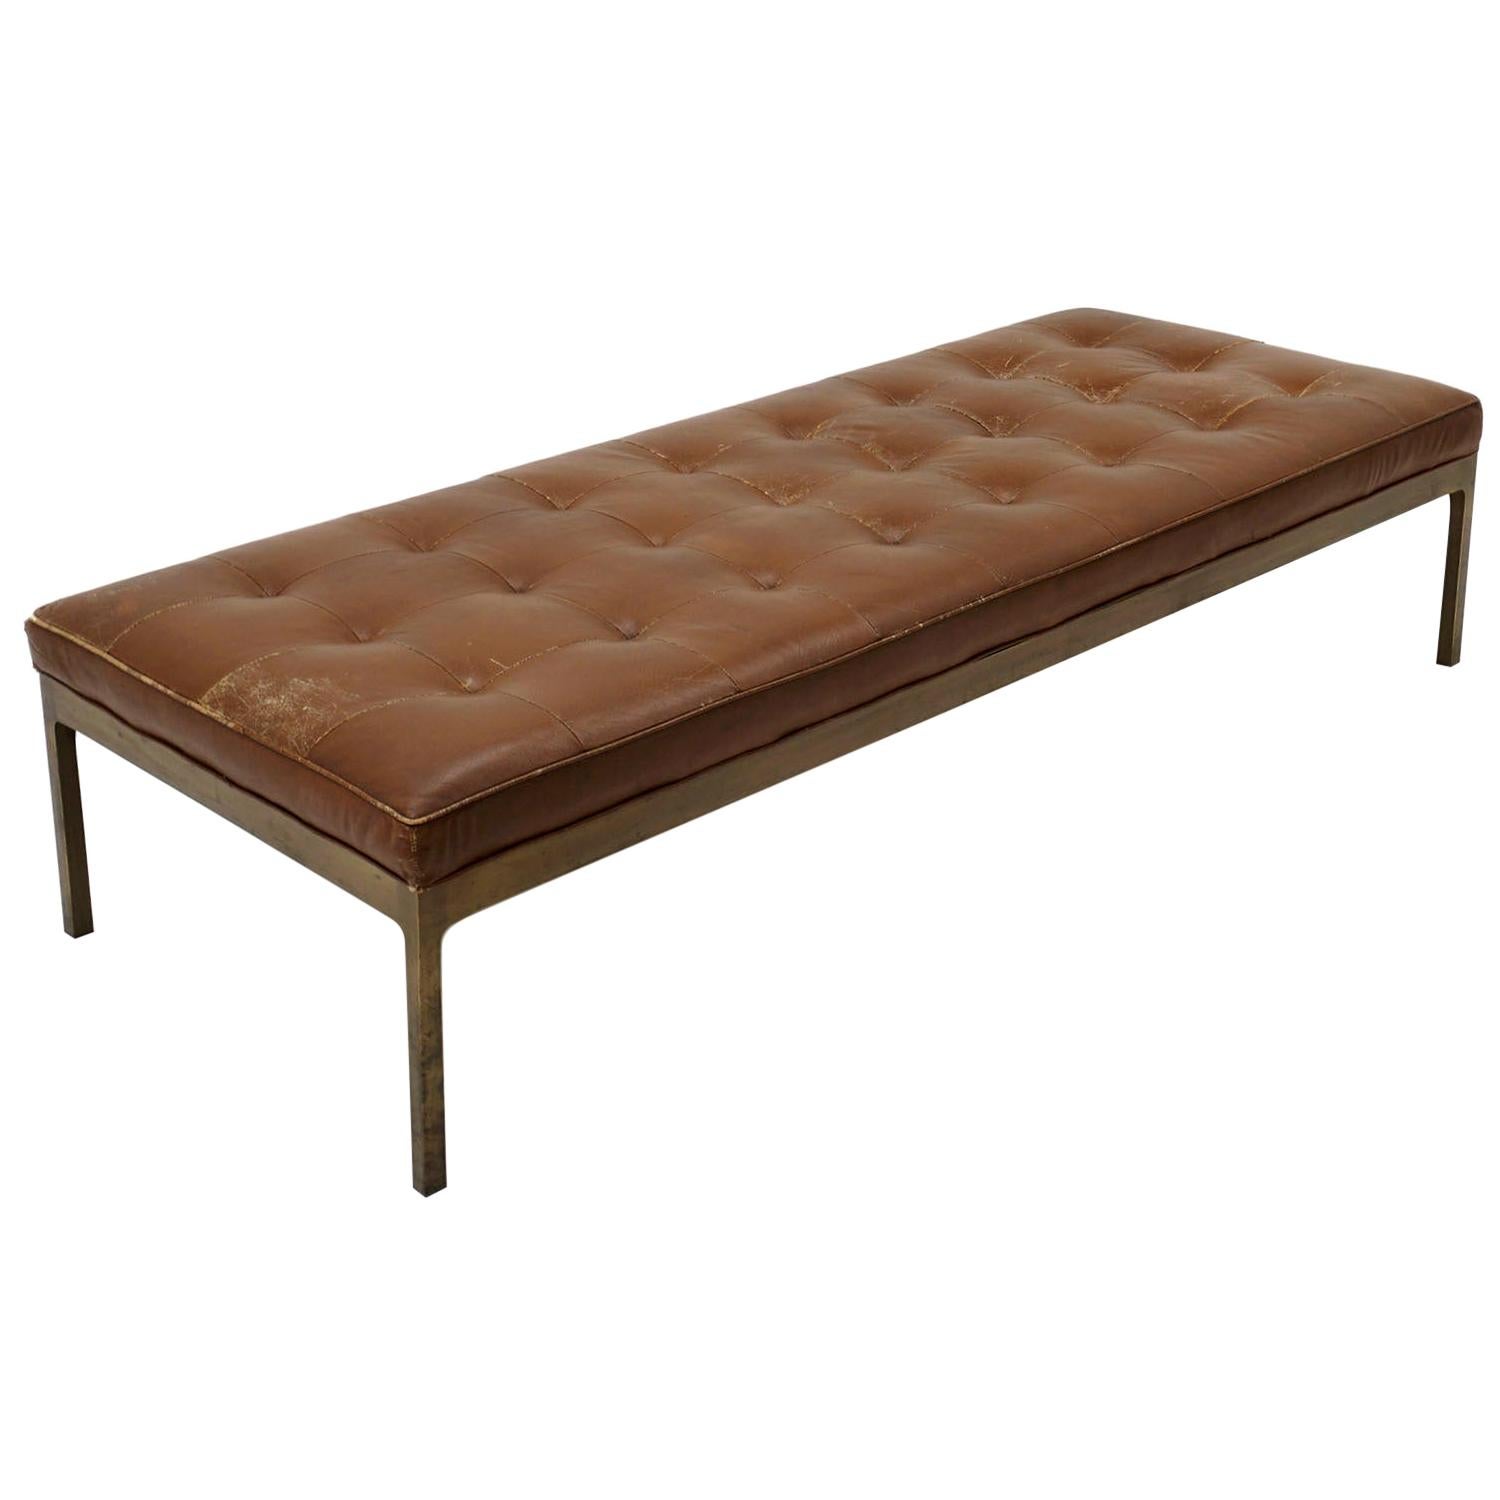 Tufted Brown Leather Bench with Solid Bronze Frame by Nico Zographos, Signed